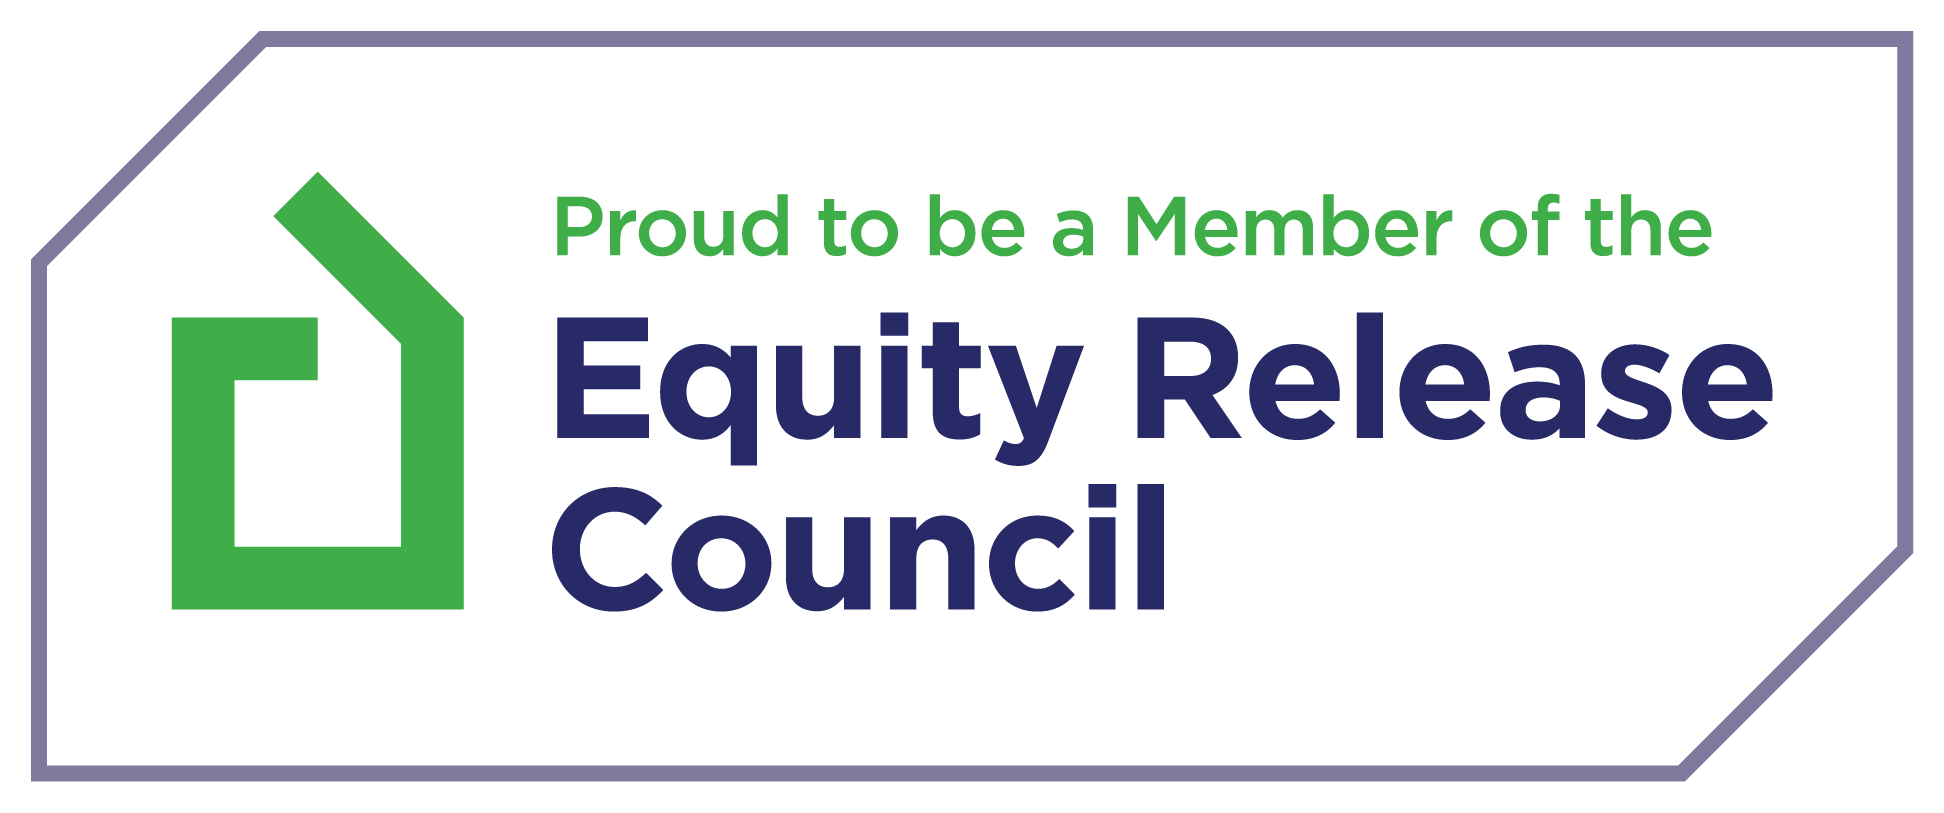 Proud to be a member of the Equity Release Council logo